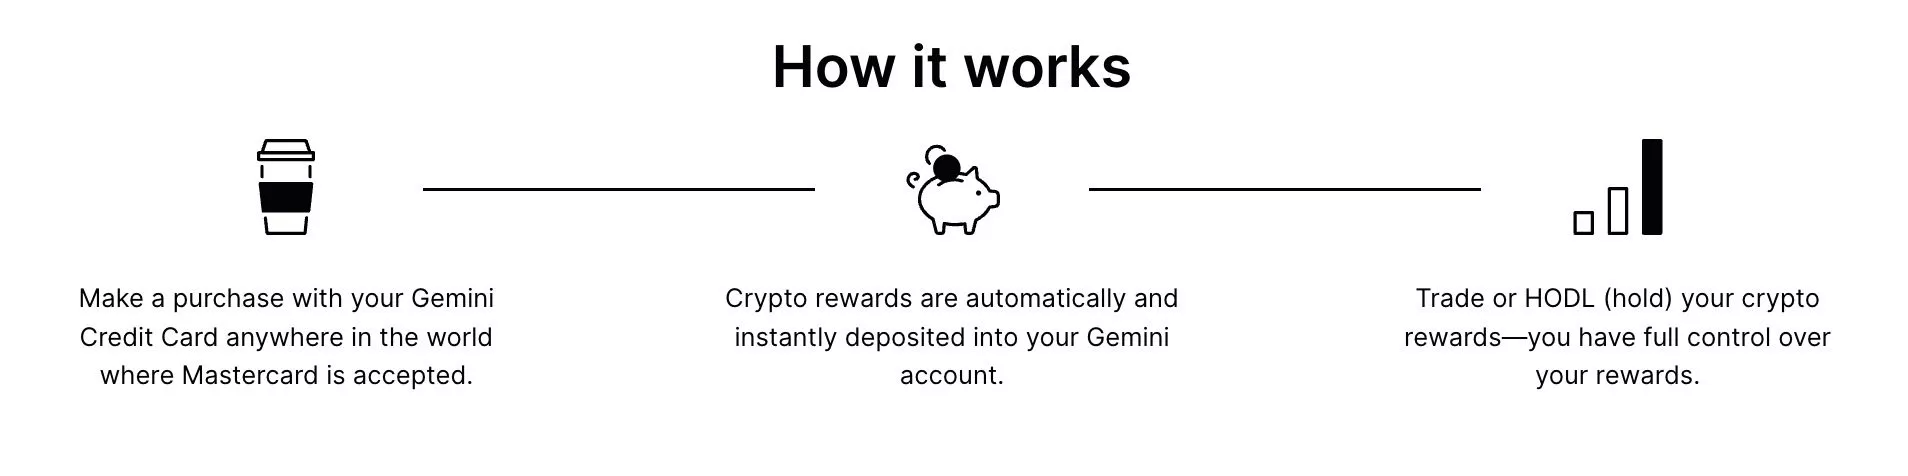 gemini review credit card how it works